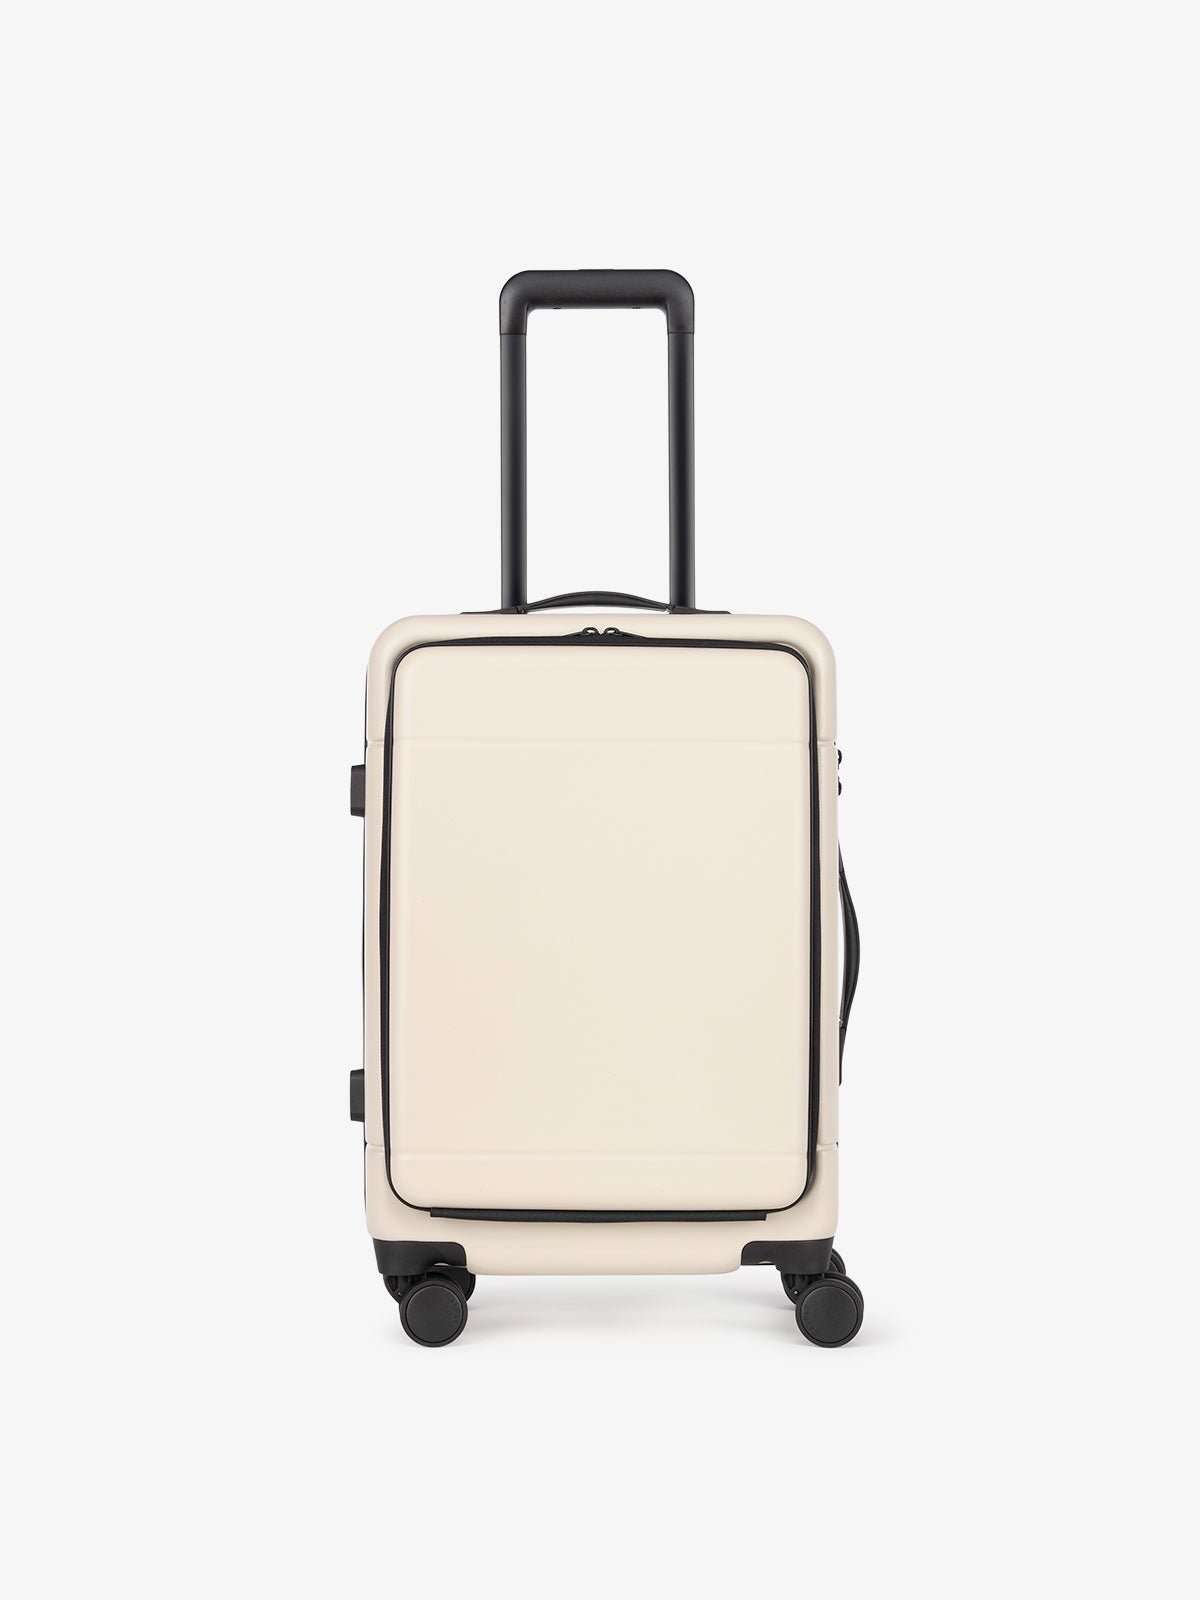 CALPAK Hue hardside carry-on spinner luggage with laptop compartment in cream linen color